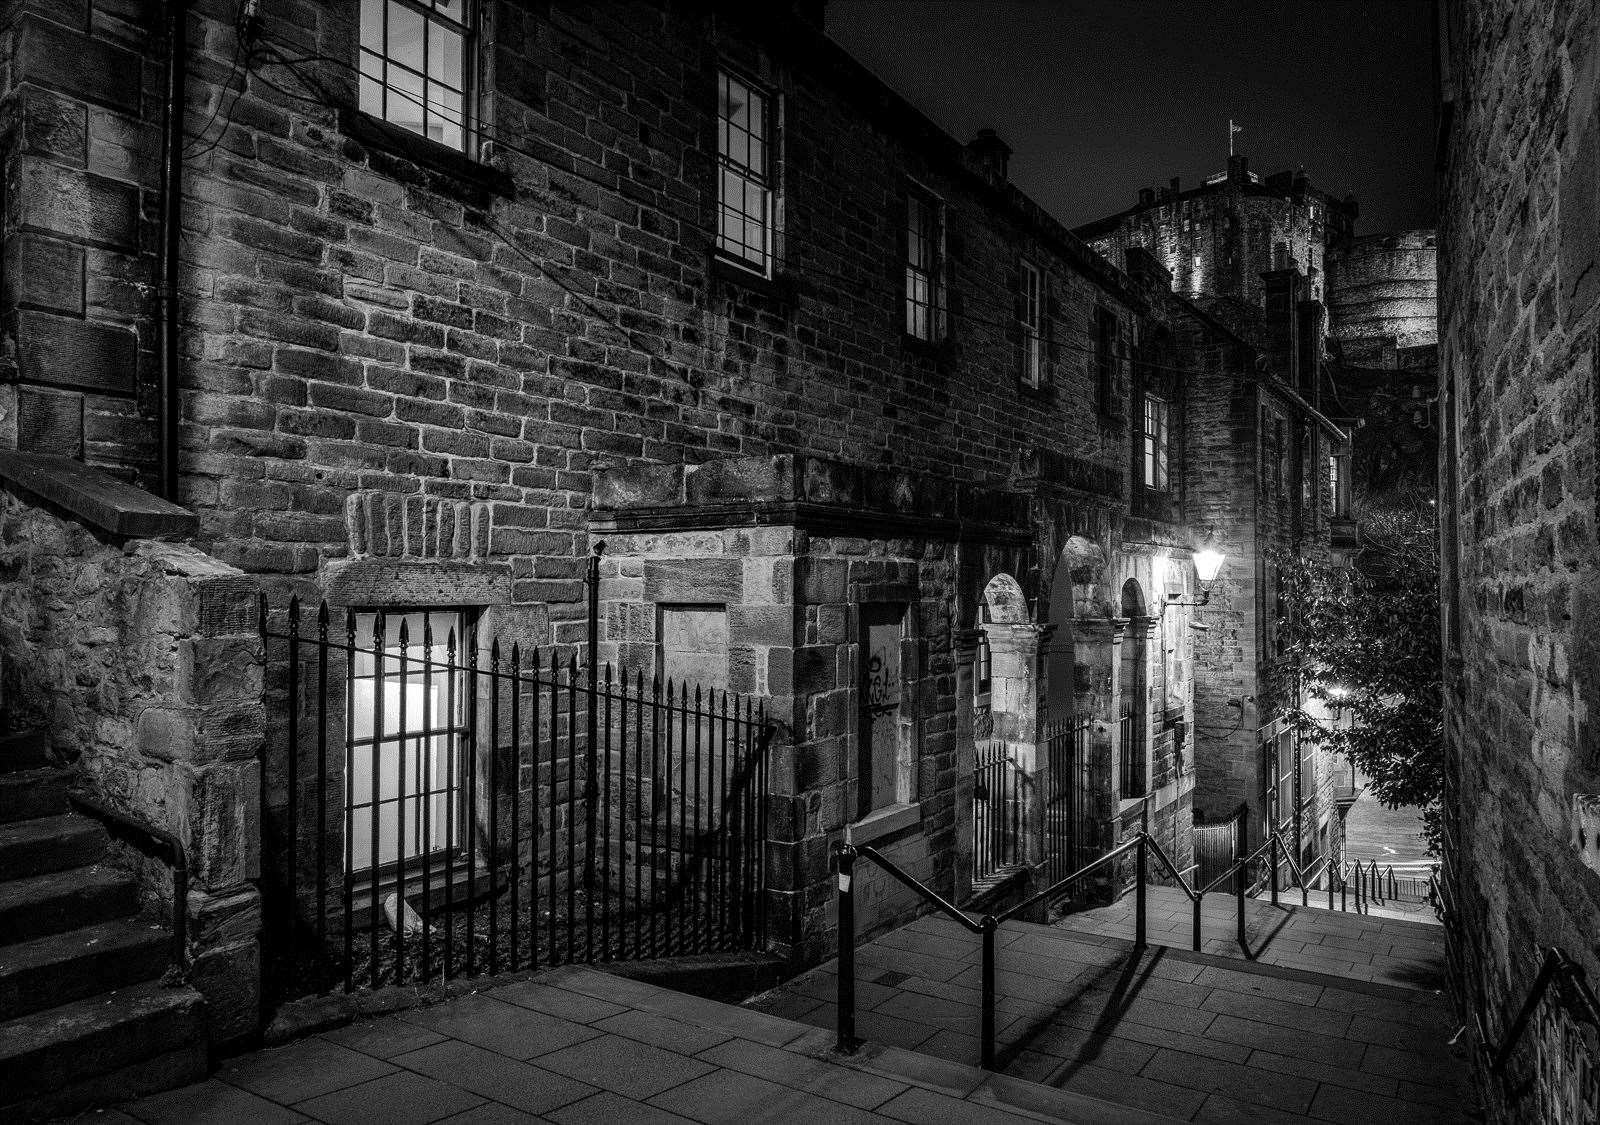 An atmospheric shot of The Vennel, a dimly lit Edinburgh street scene, earned Andy Kirby first place in the monochrome section.